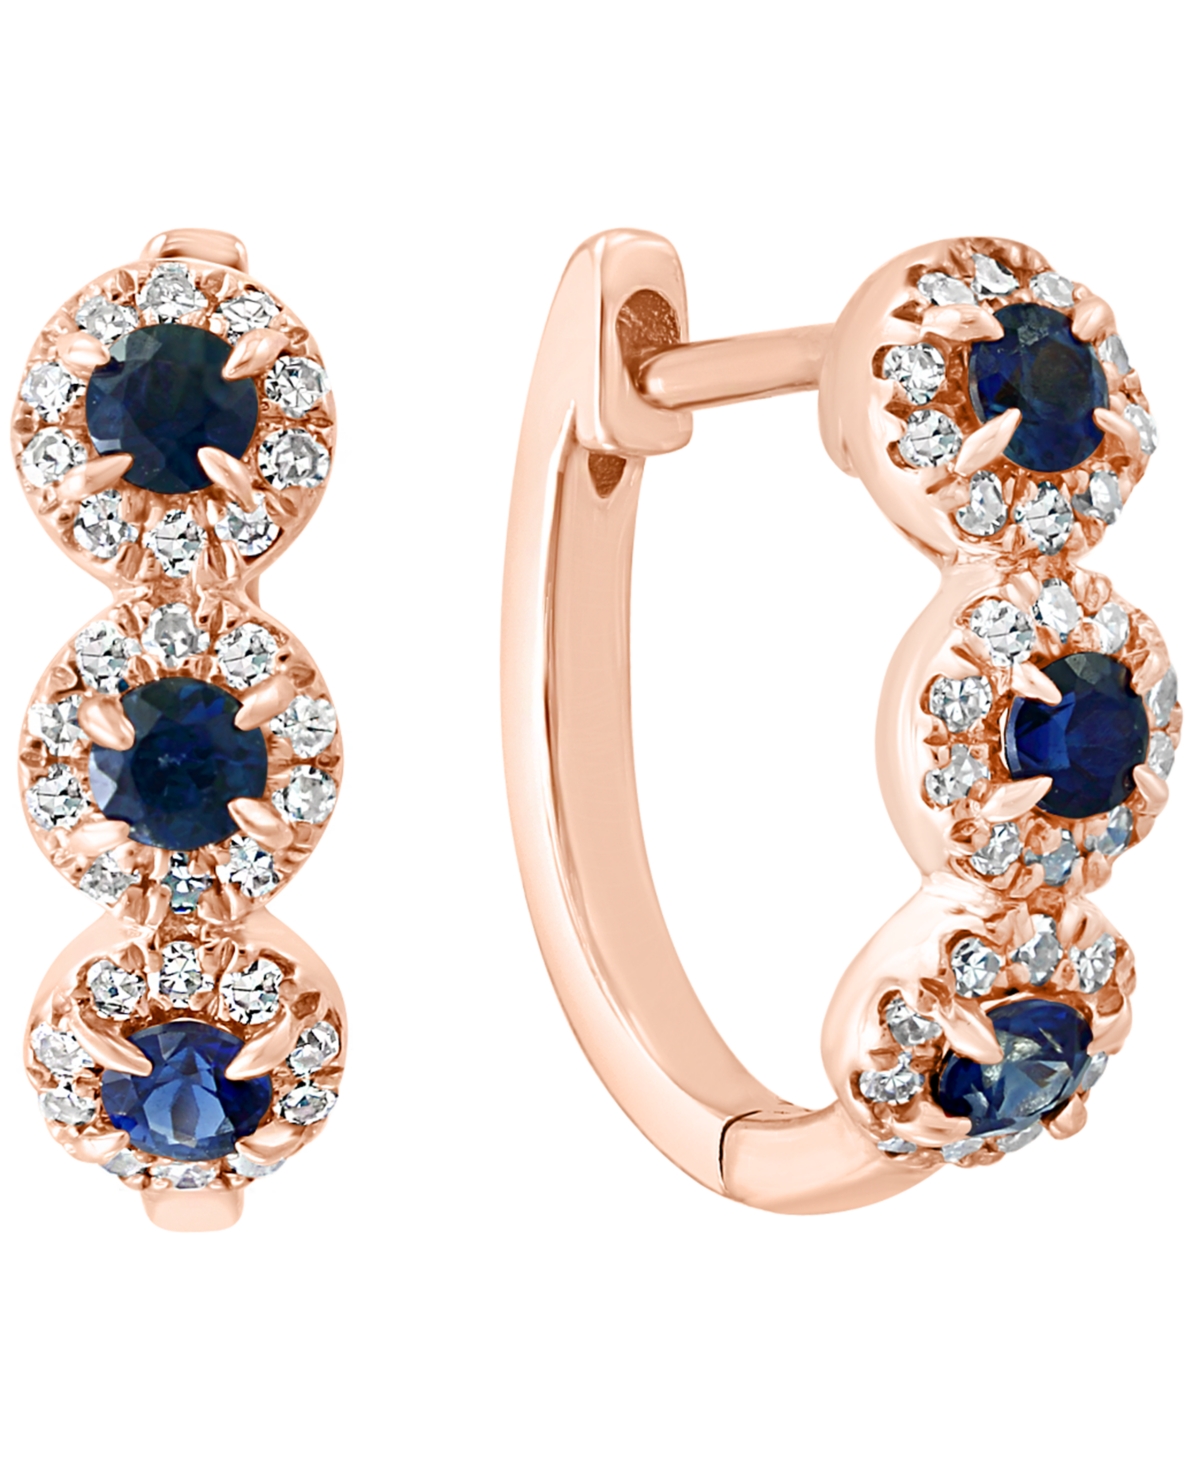 Sapphire (1/3 ct. t.w.) & Diamond (1/5 ct. t.w.) Oval Hoop Earrings in 14k Rose Gold ( Also in White Gold) - Sapphire/Rose Gold